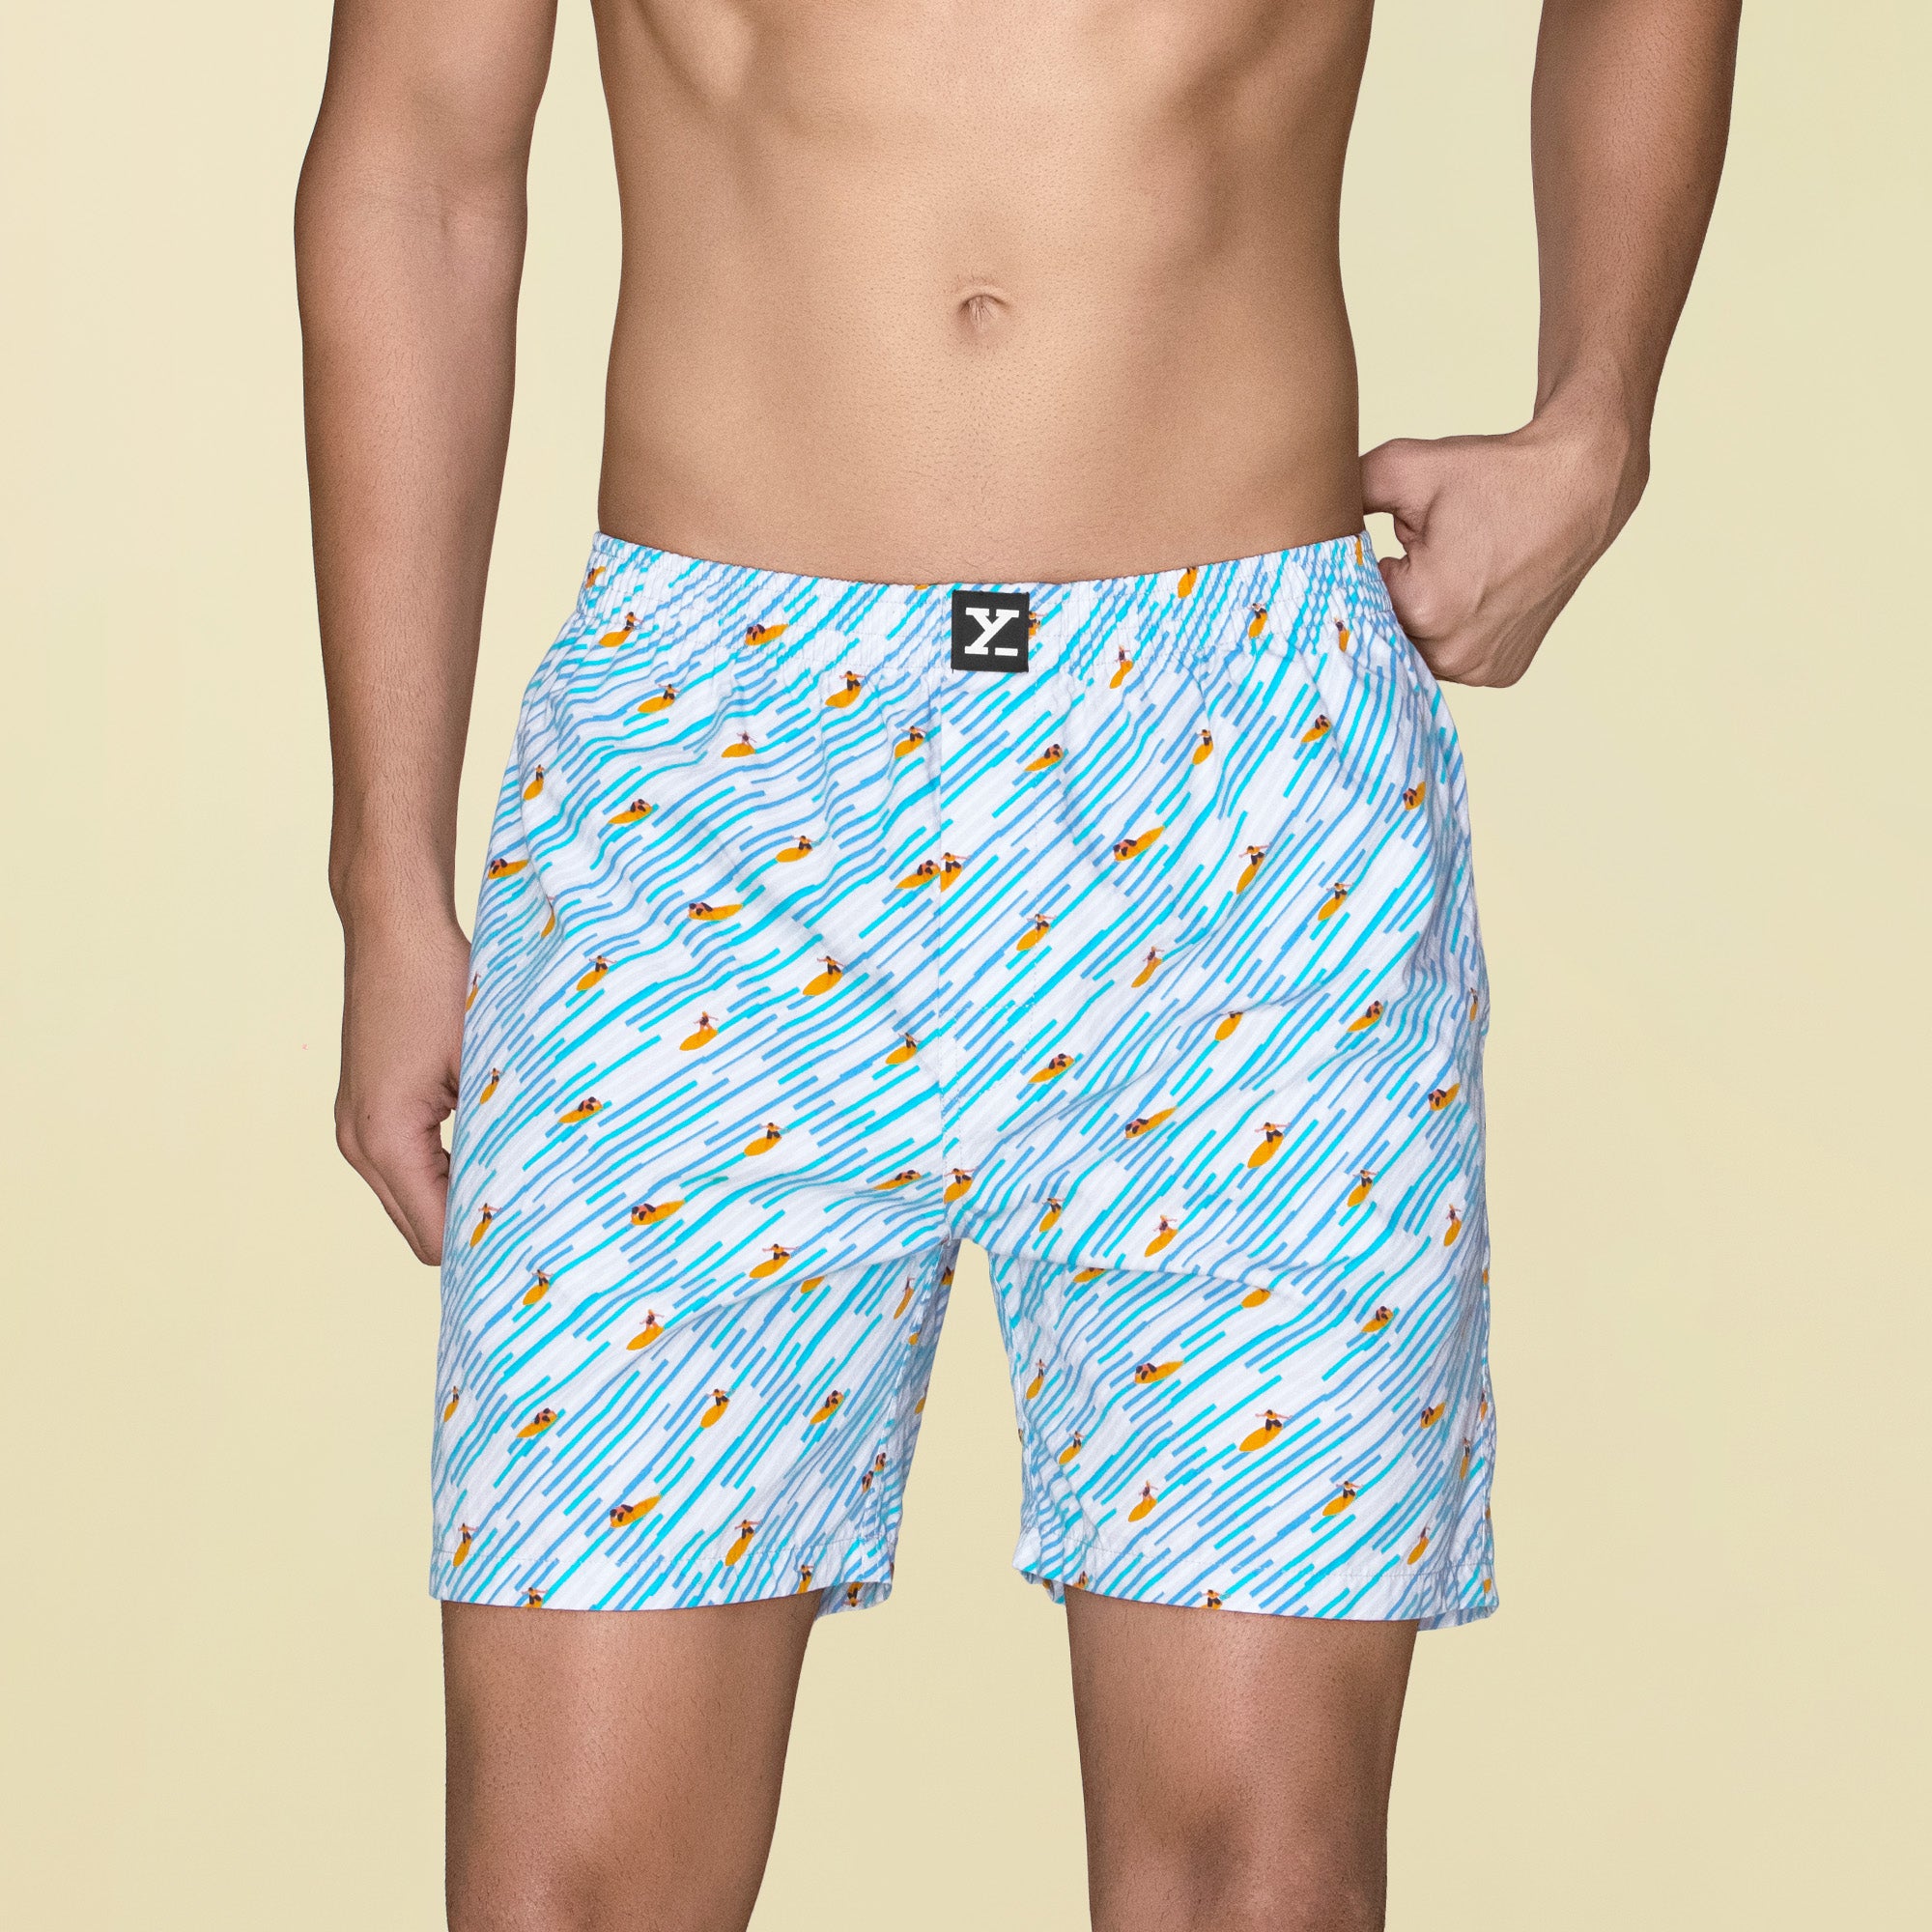 Surf Super Combed Cotton Boxer Shorts For Men Surfing Blue - XYXX Mens Apparels